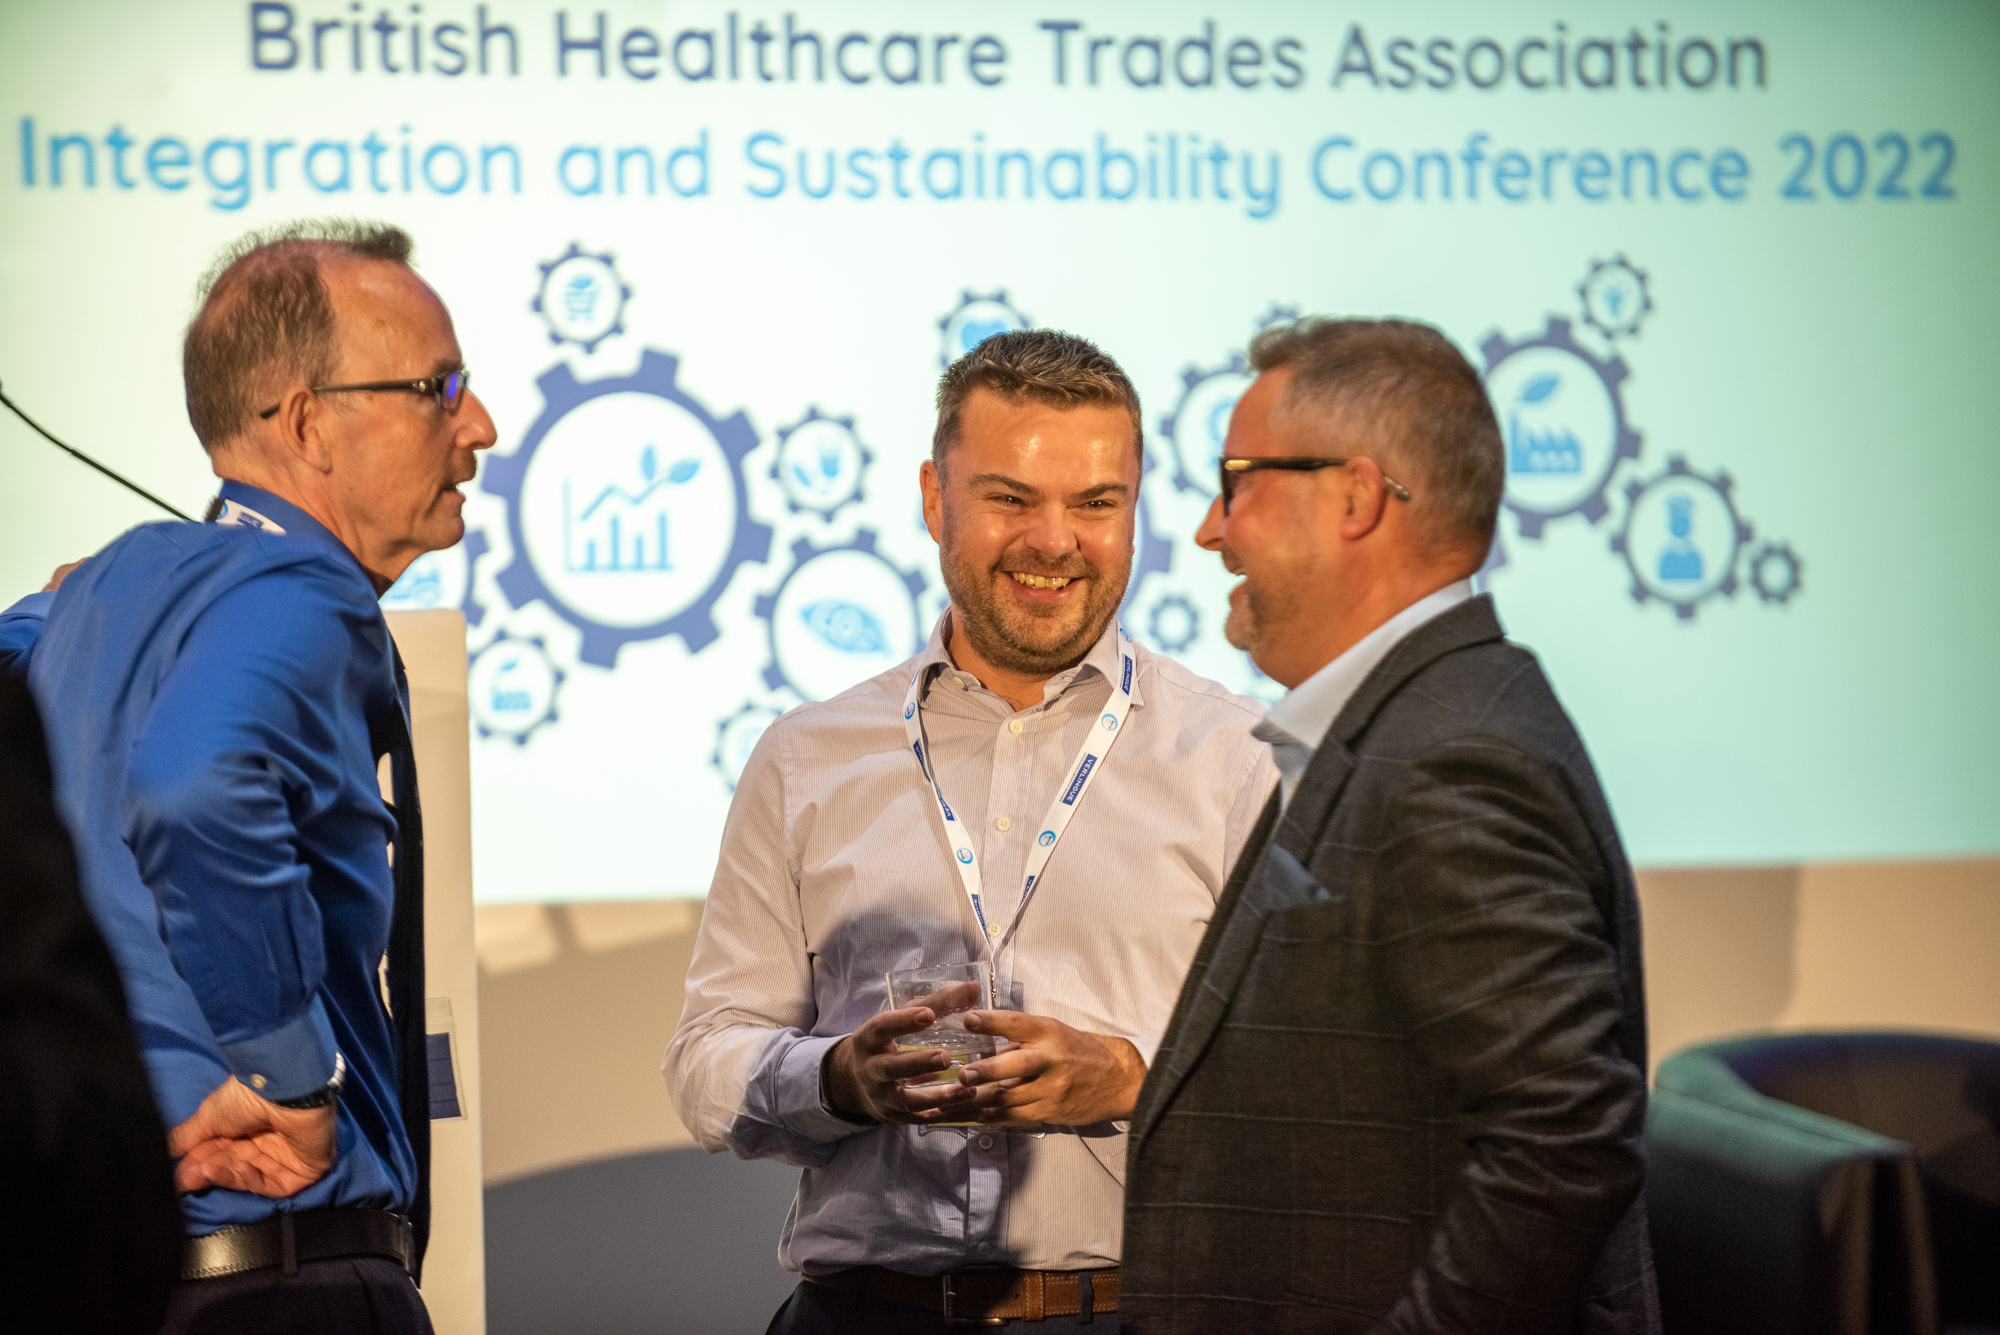 Healthcare businesses attend the BHTA Integration & Sustainability Conference